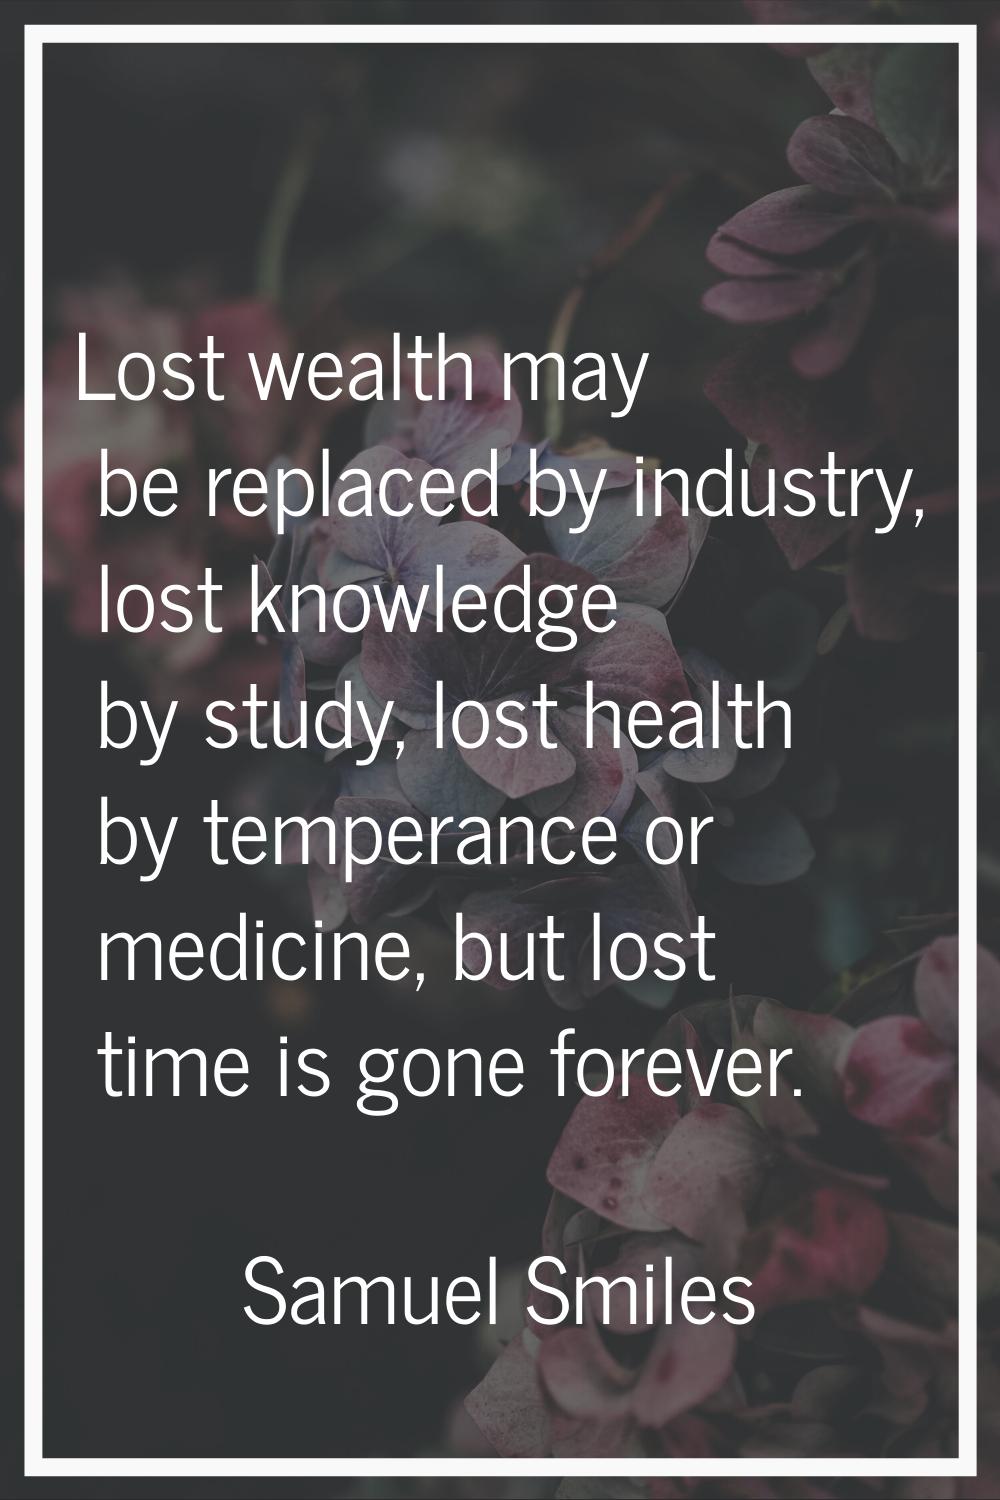 Lost wealth may be replaced by industry, lost knowledge by study, lost health by temperance or medi